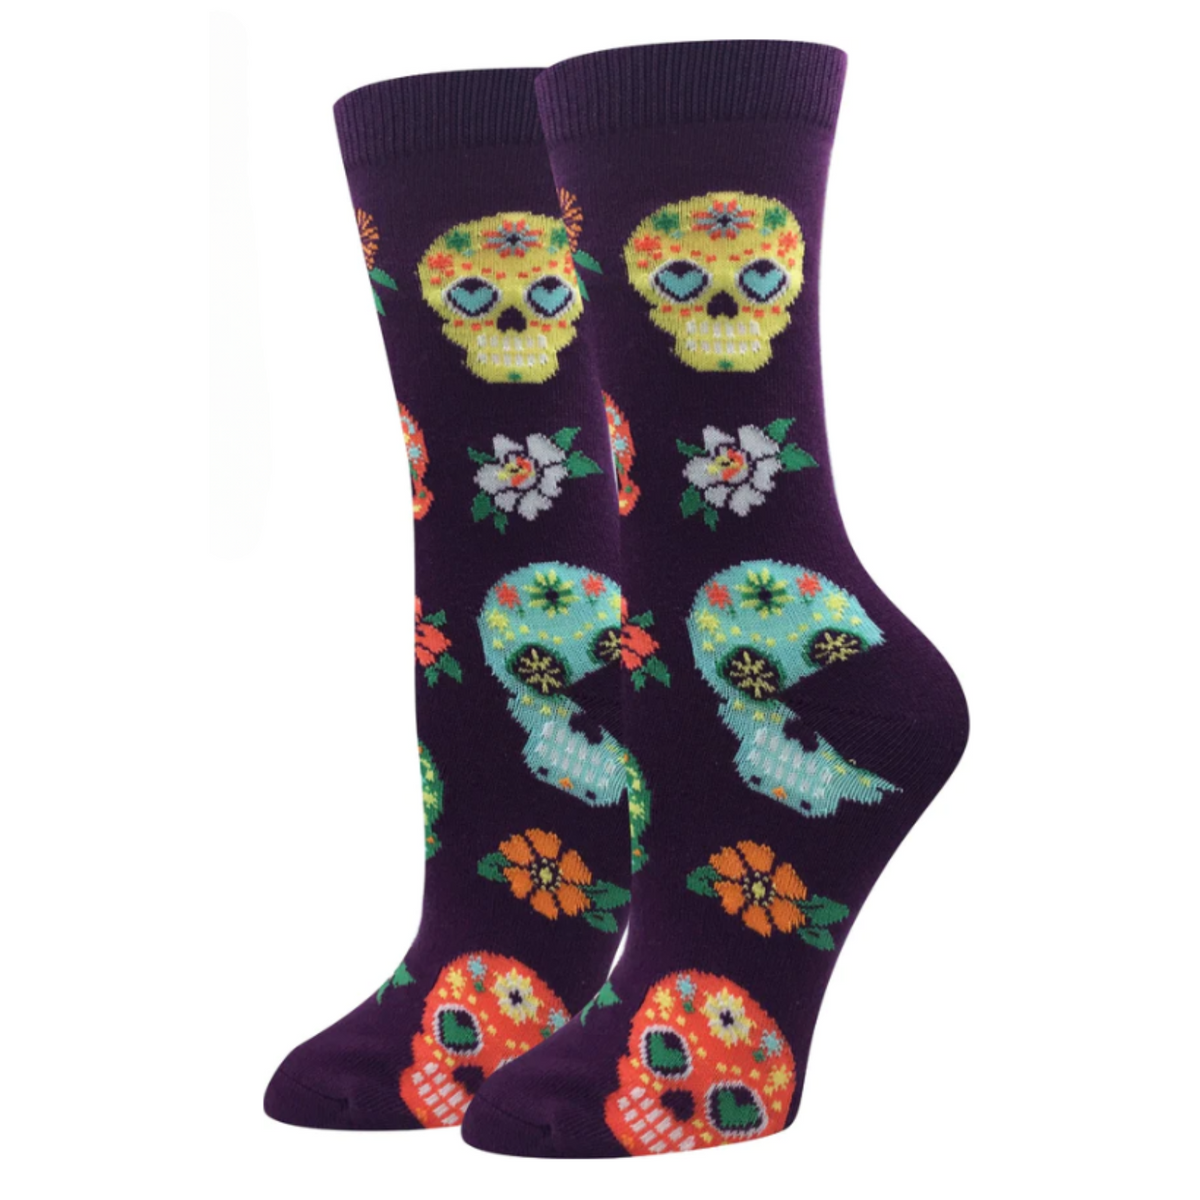 Sock Harbor Calaveras women&#39;s crew sock featuring purple sock with orange, yellow, and teal Sugar Skulls for the Day of the Dead. Socks shown on display feet from the side. 